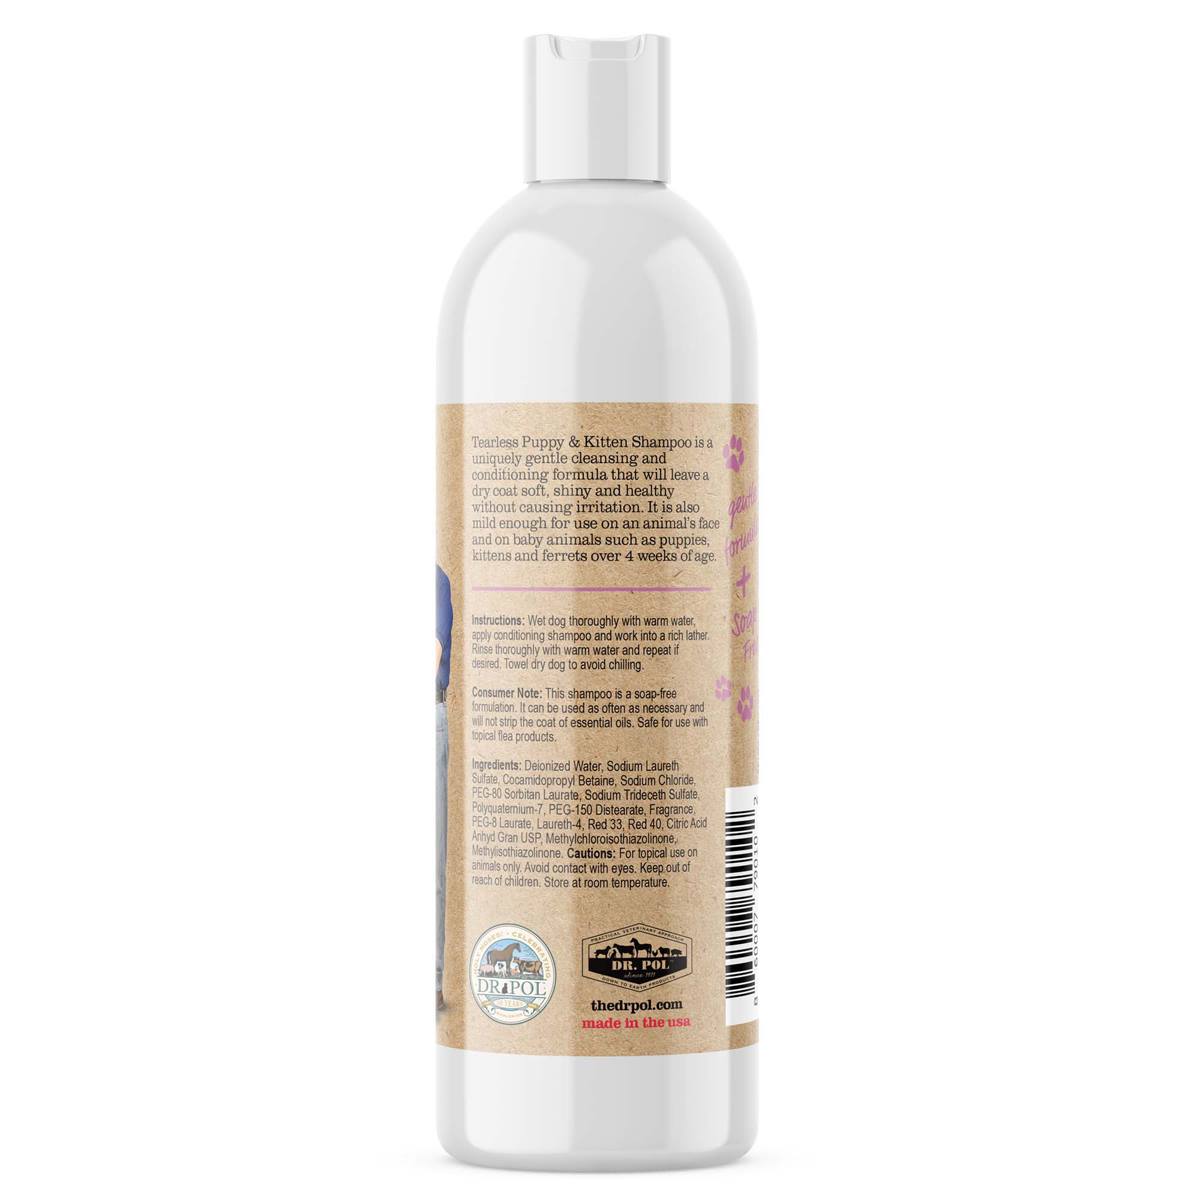 Dr. Pol Tearless Shampoo For Puppies And Kittens - 16 Oz.